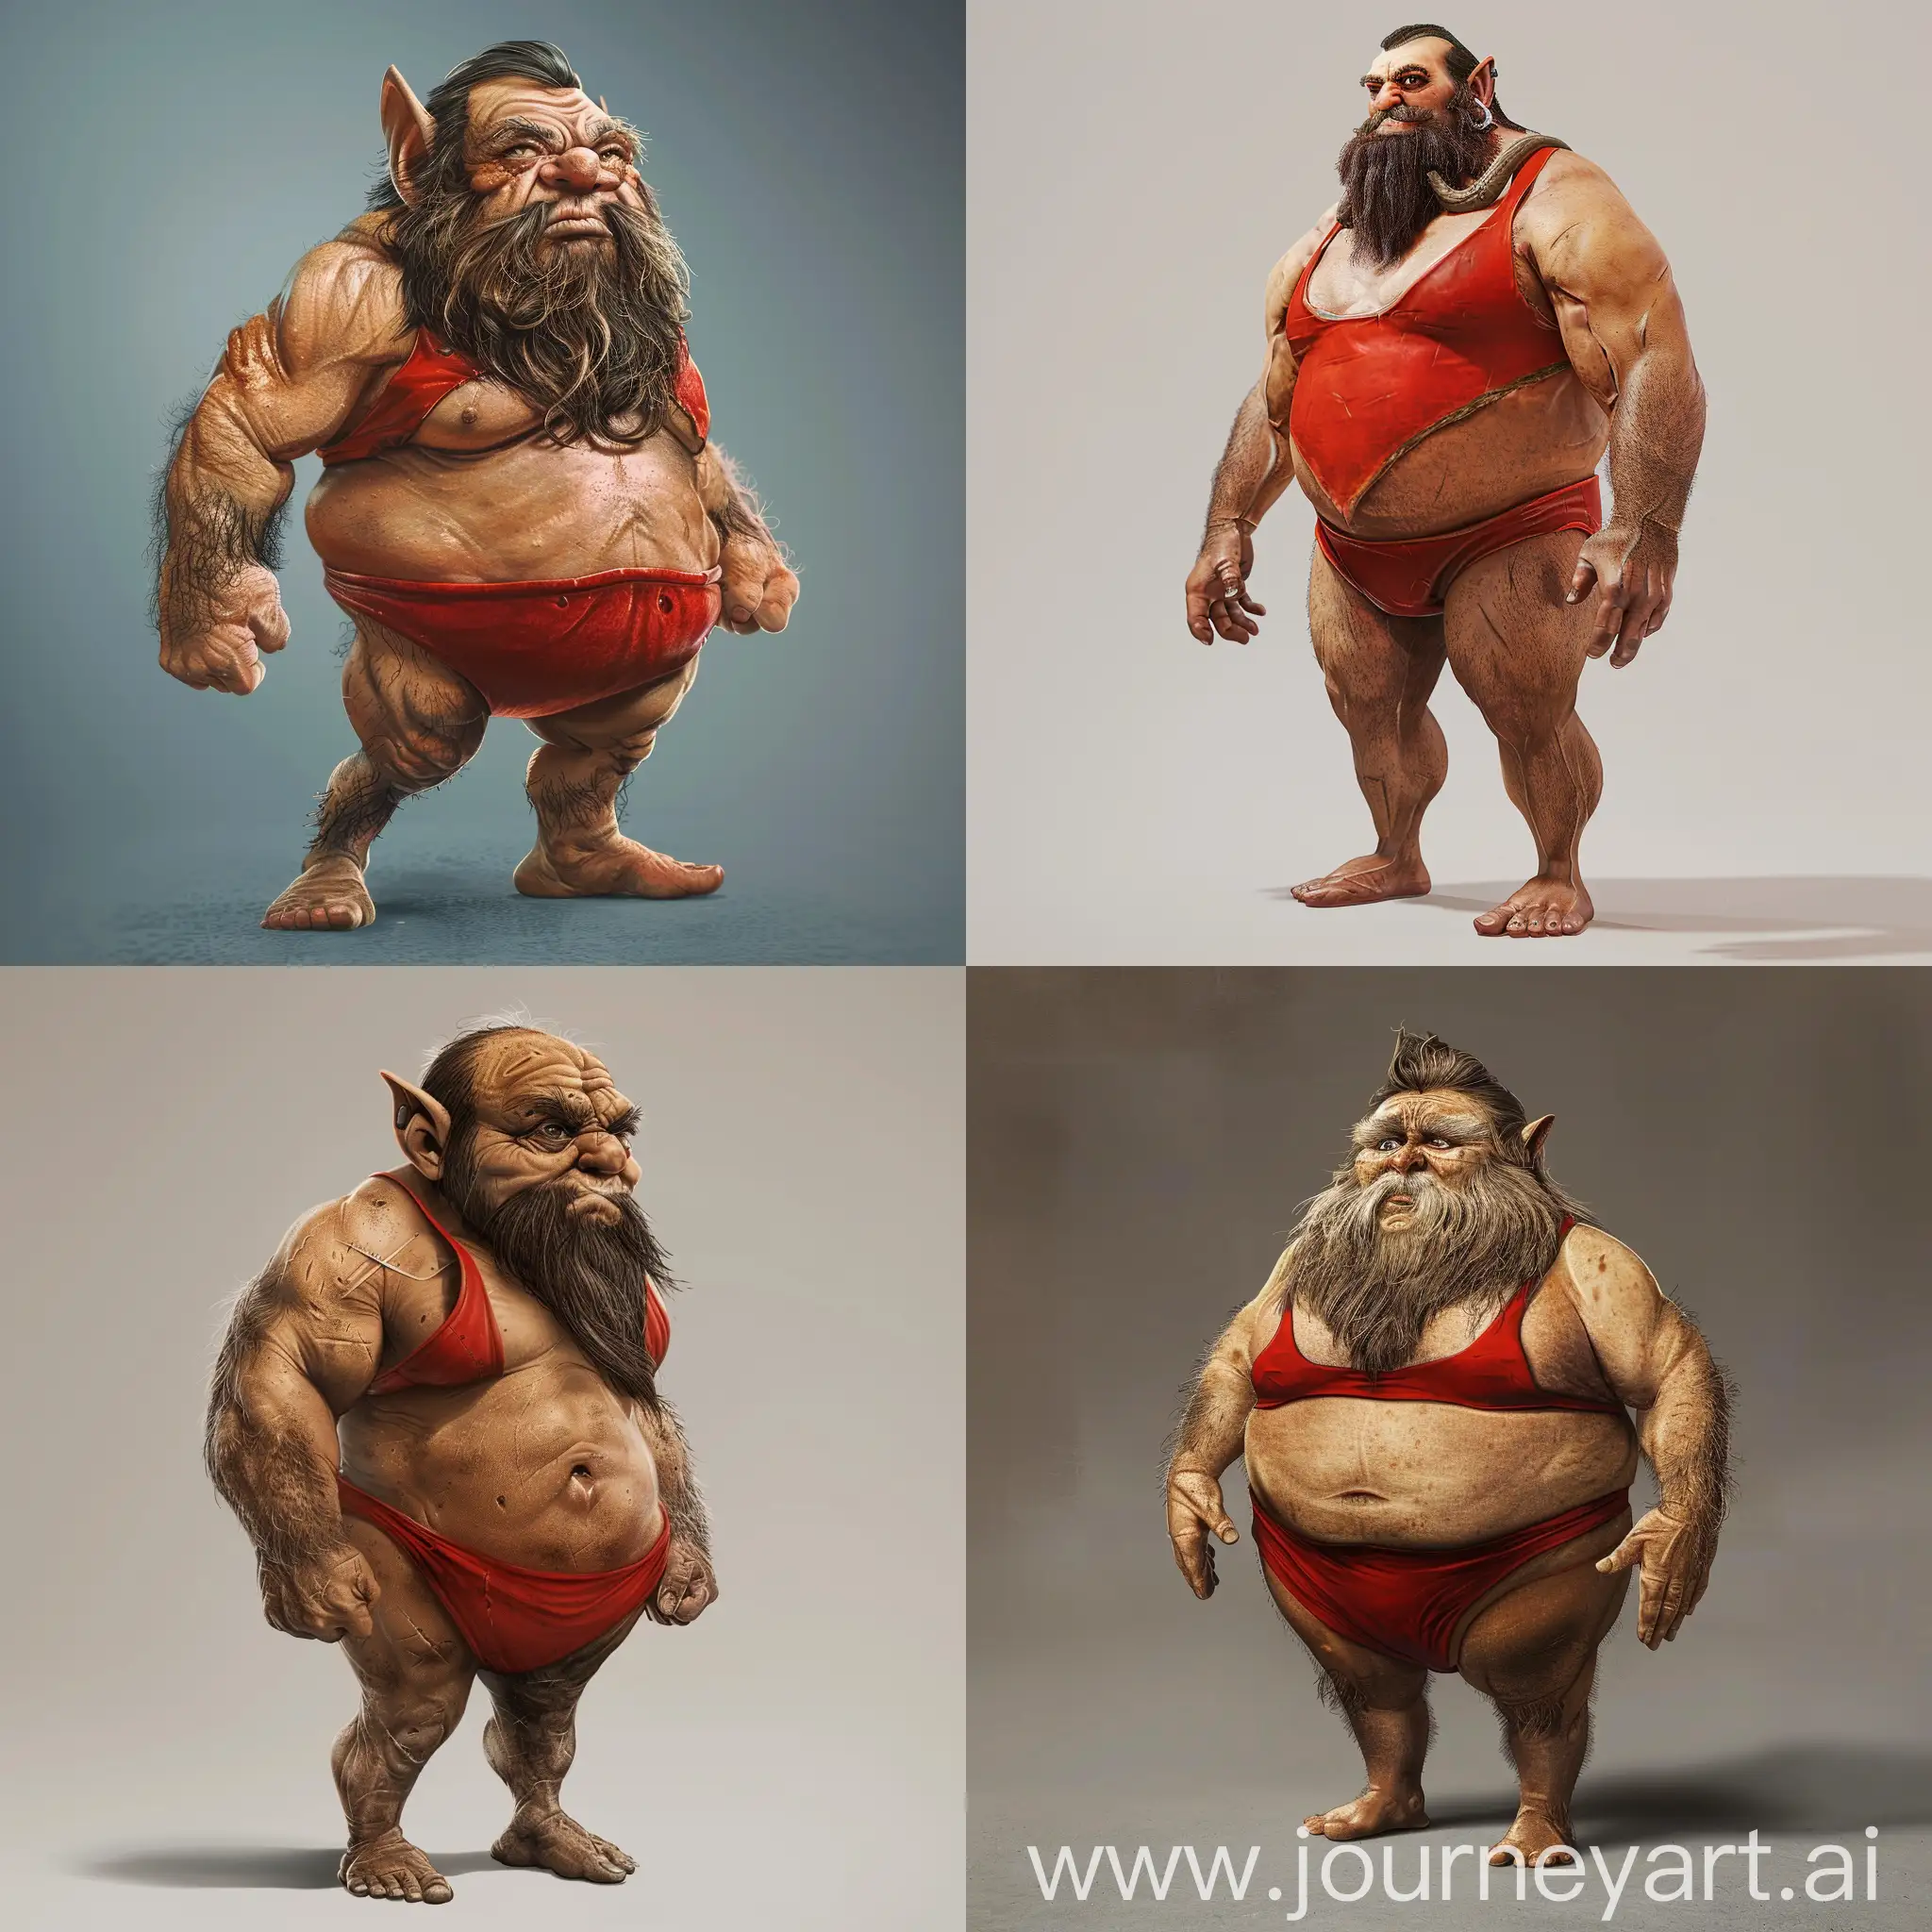 Surly-Mountain-Dwarf-Barbarian-in-Red-Swimsuit